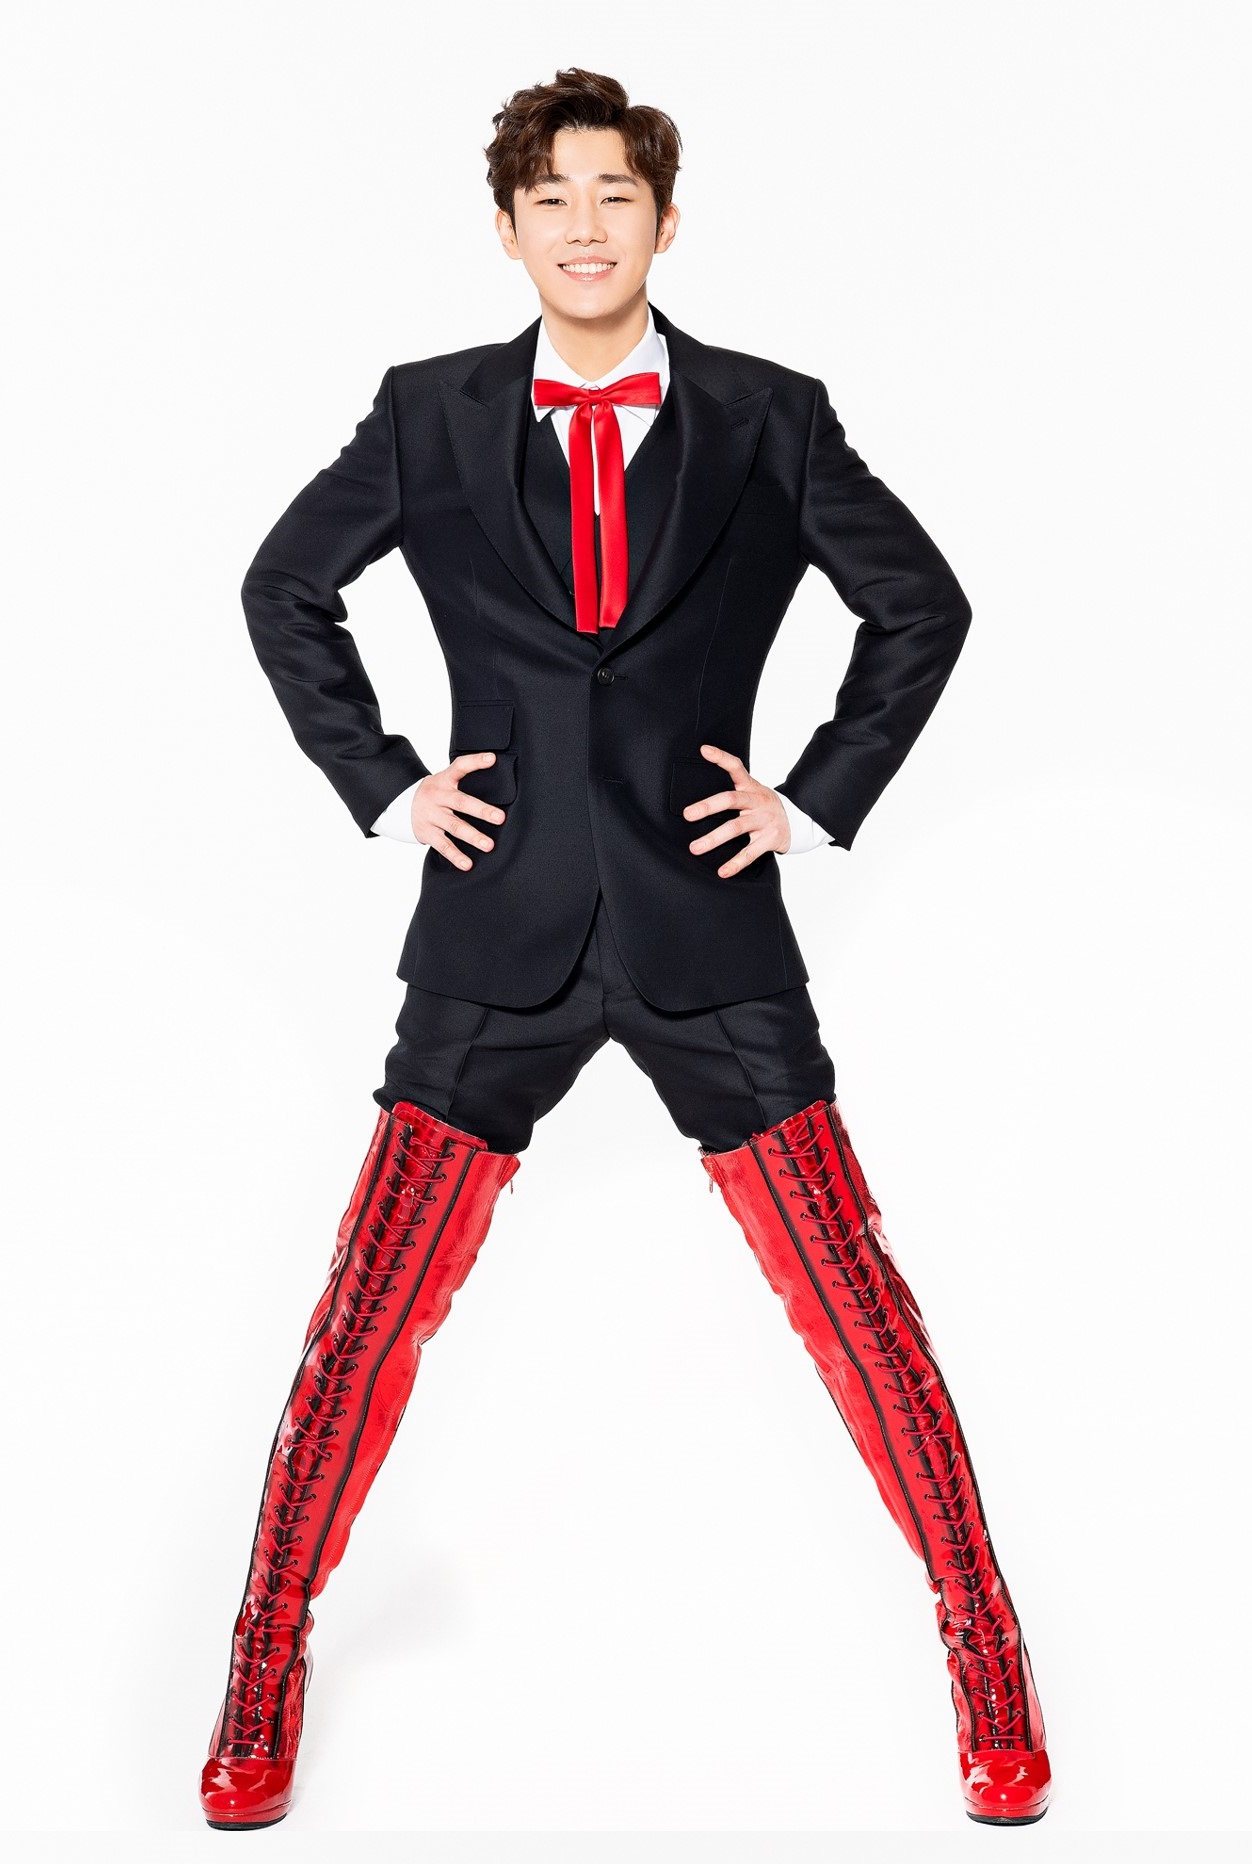 infinite-sunggyu-confirms-to-play-charlie-in-musical-kinky-boots-2